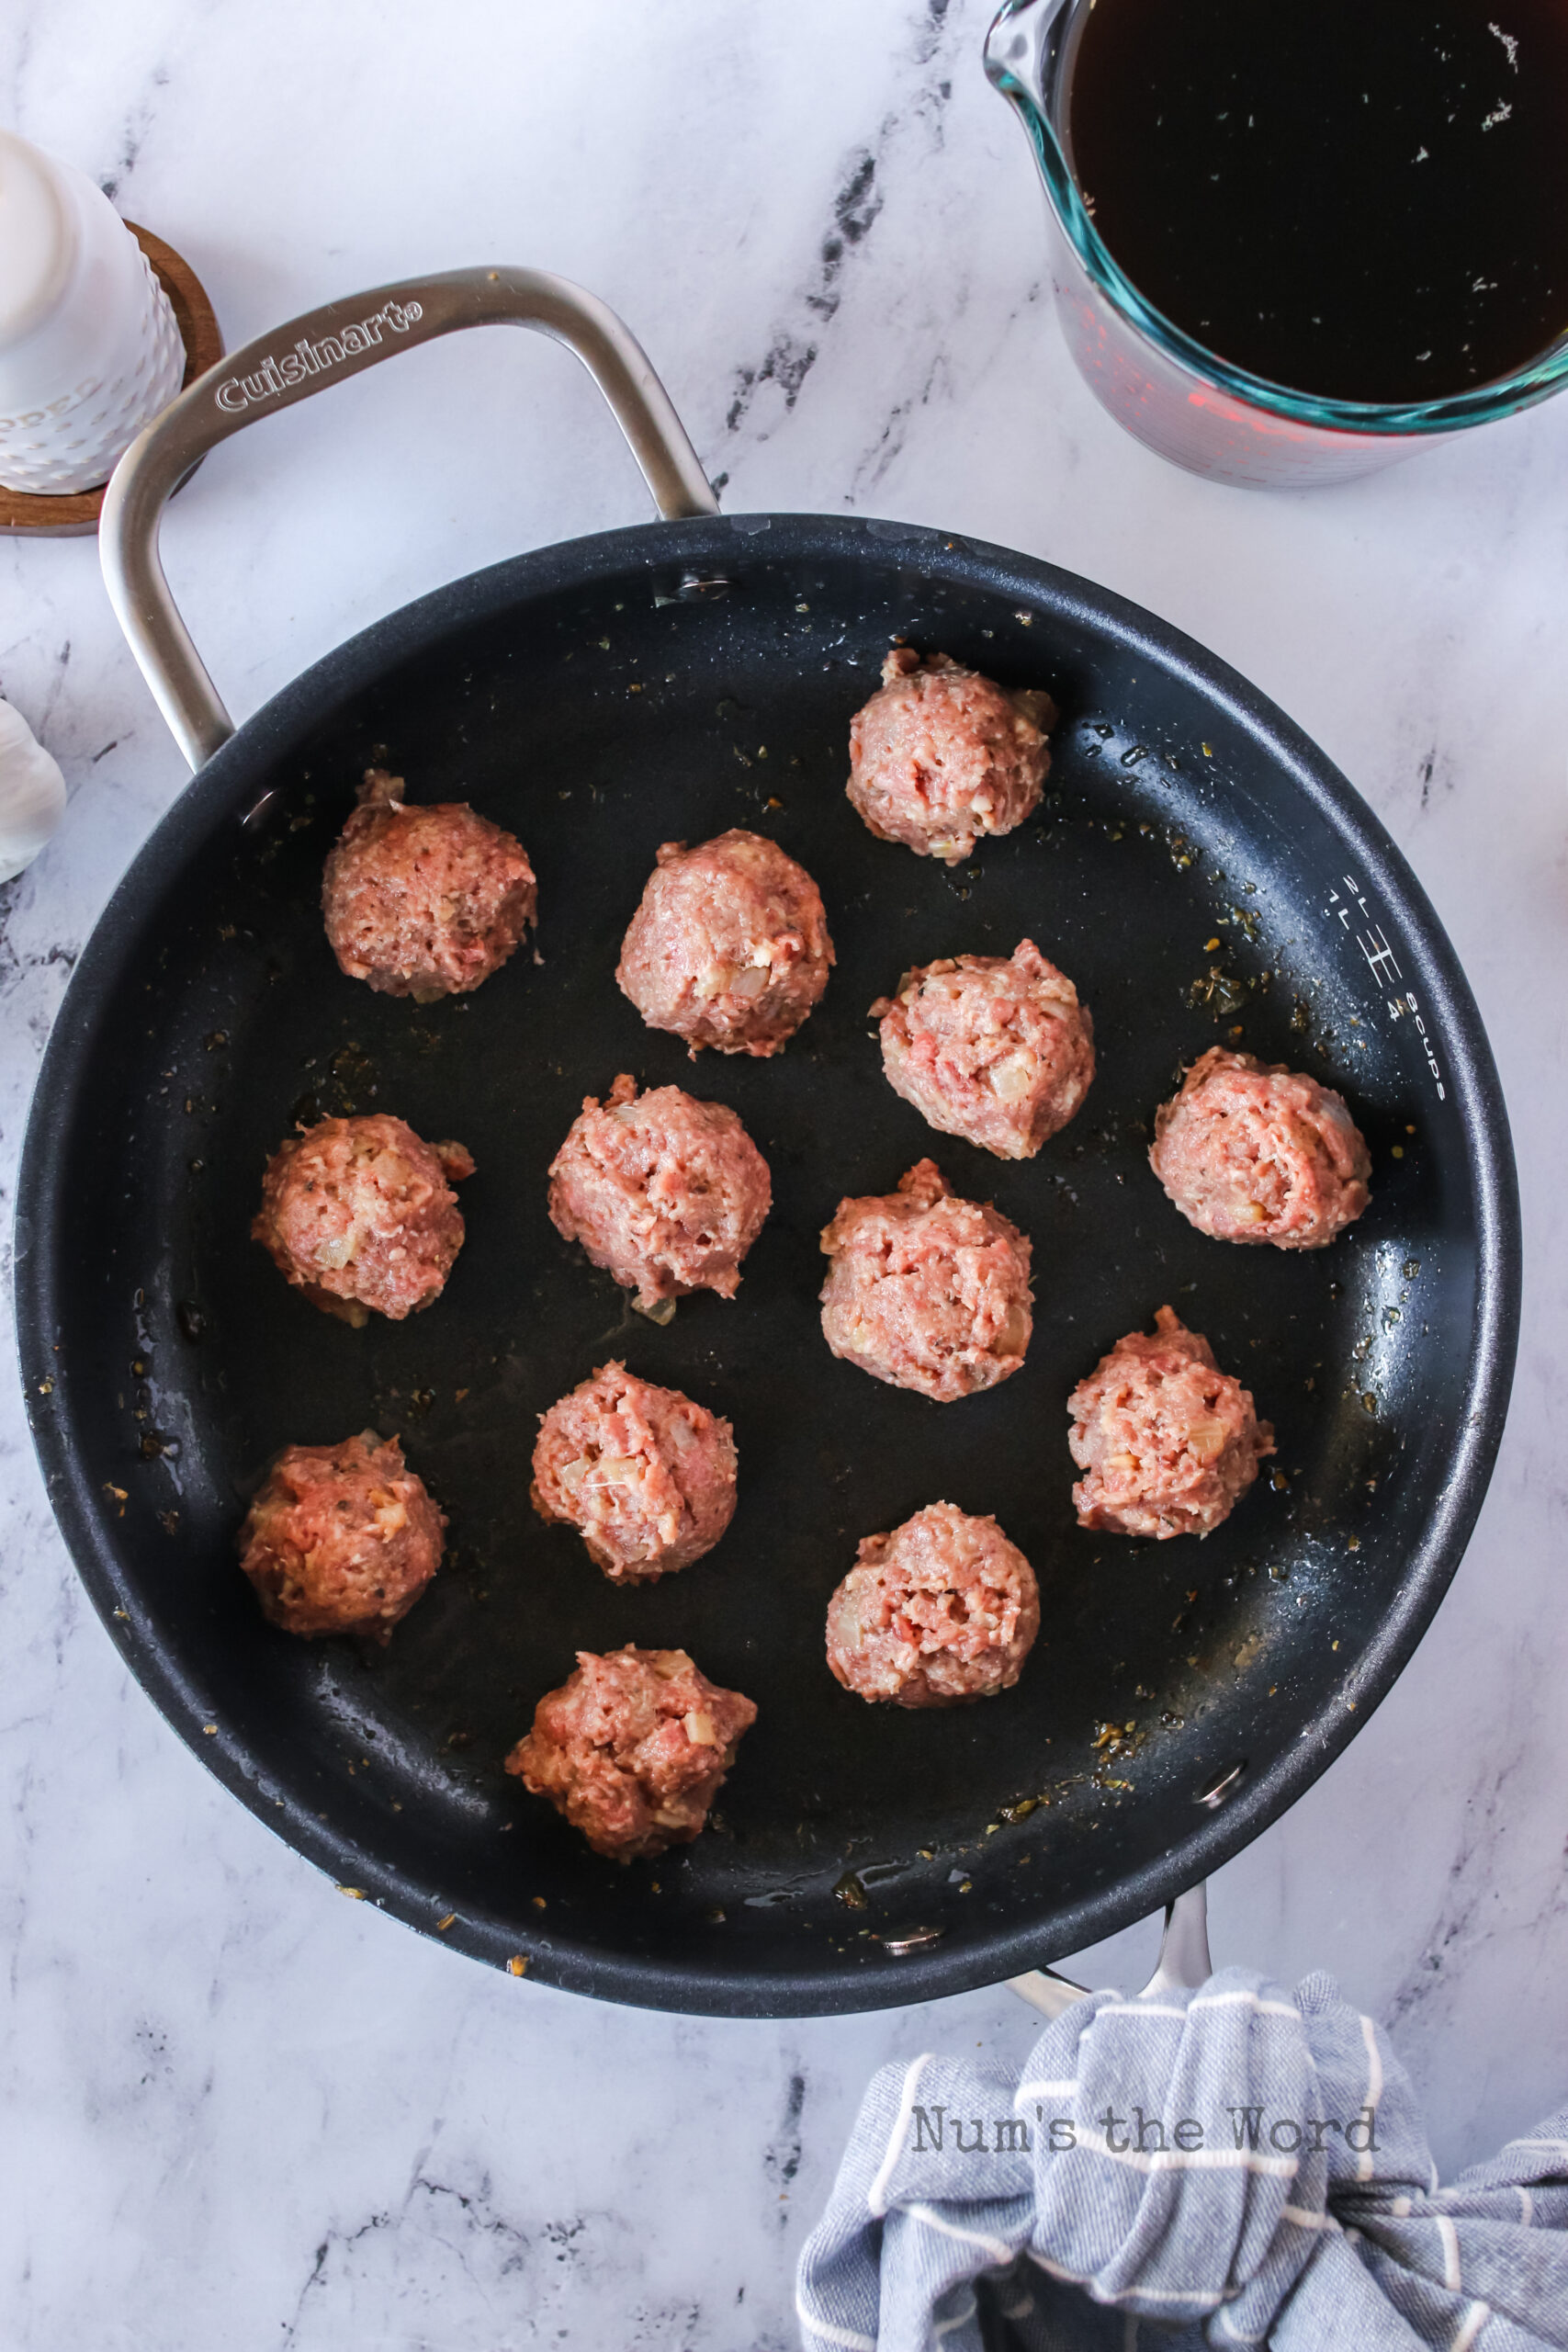 Meatballs placed in a hot skillet.